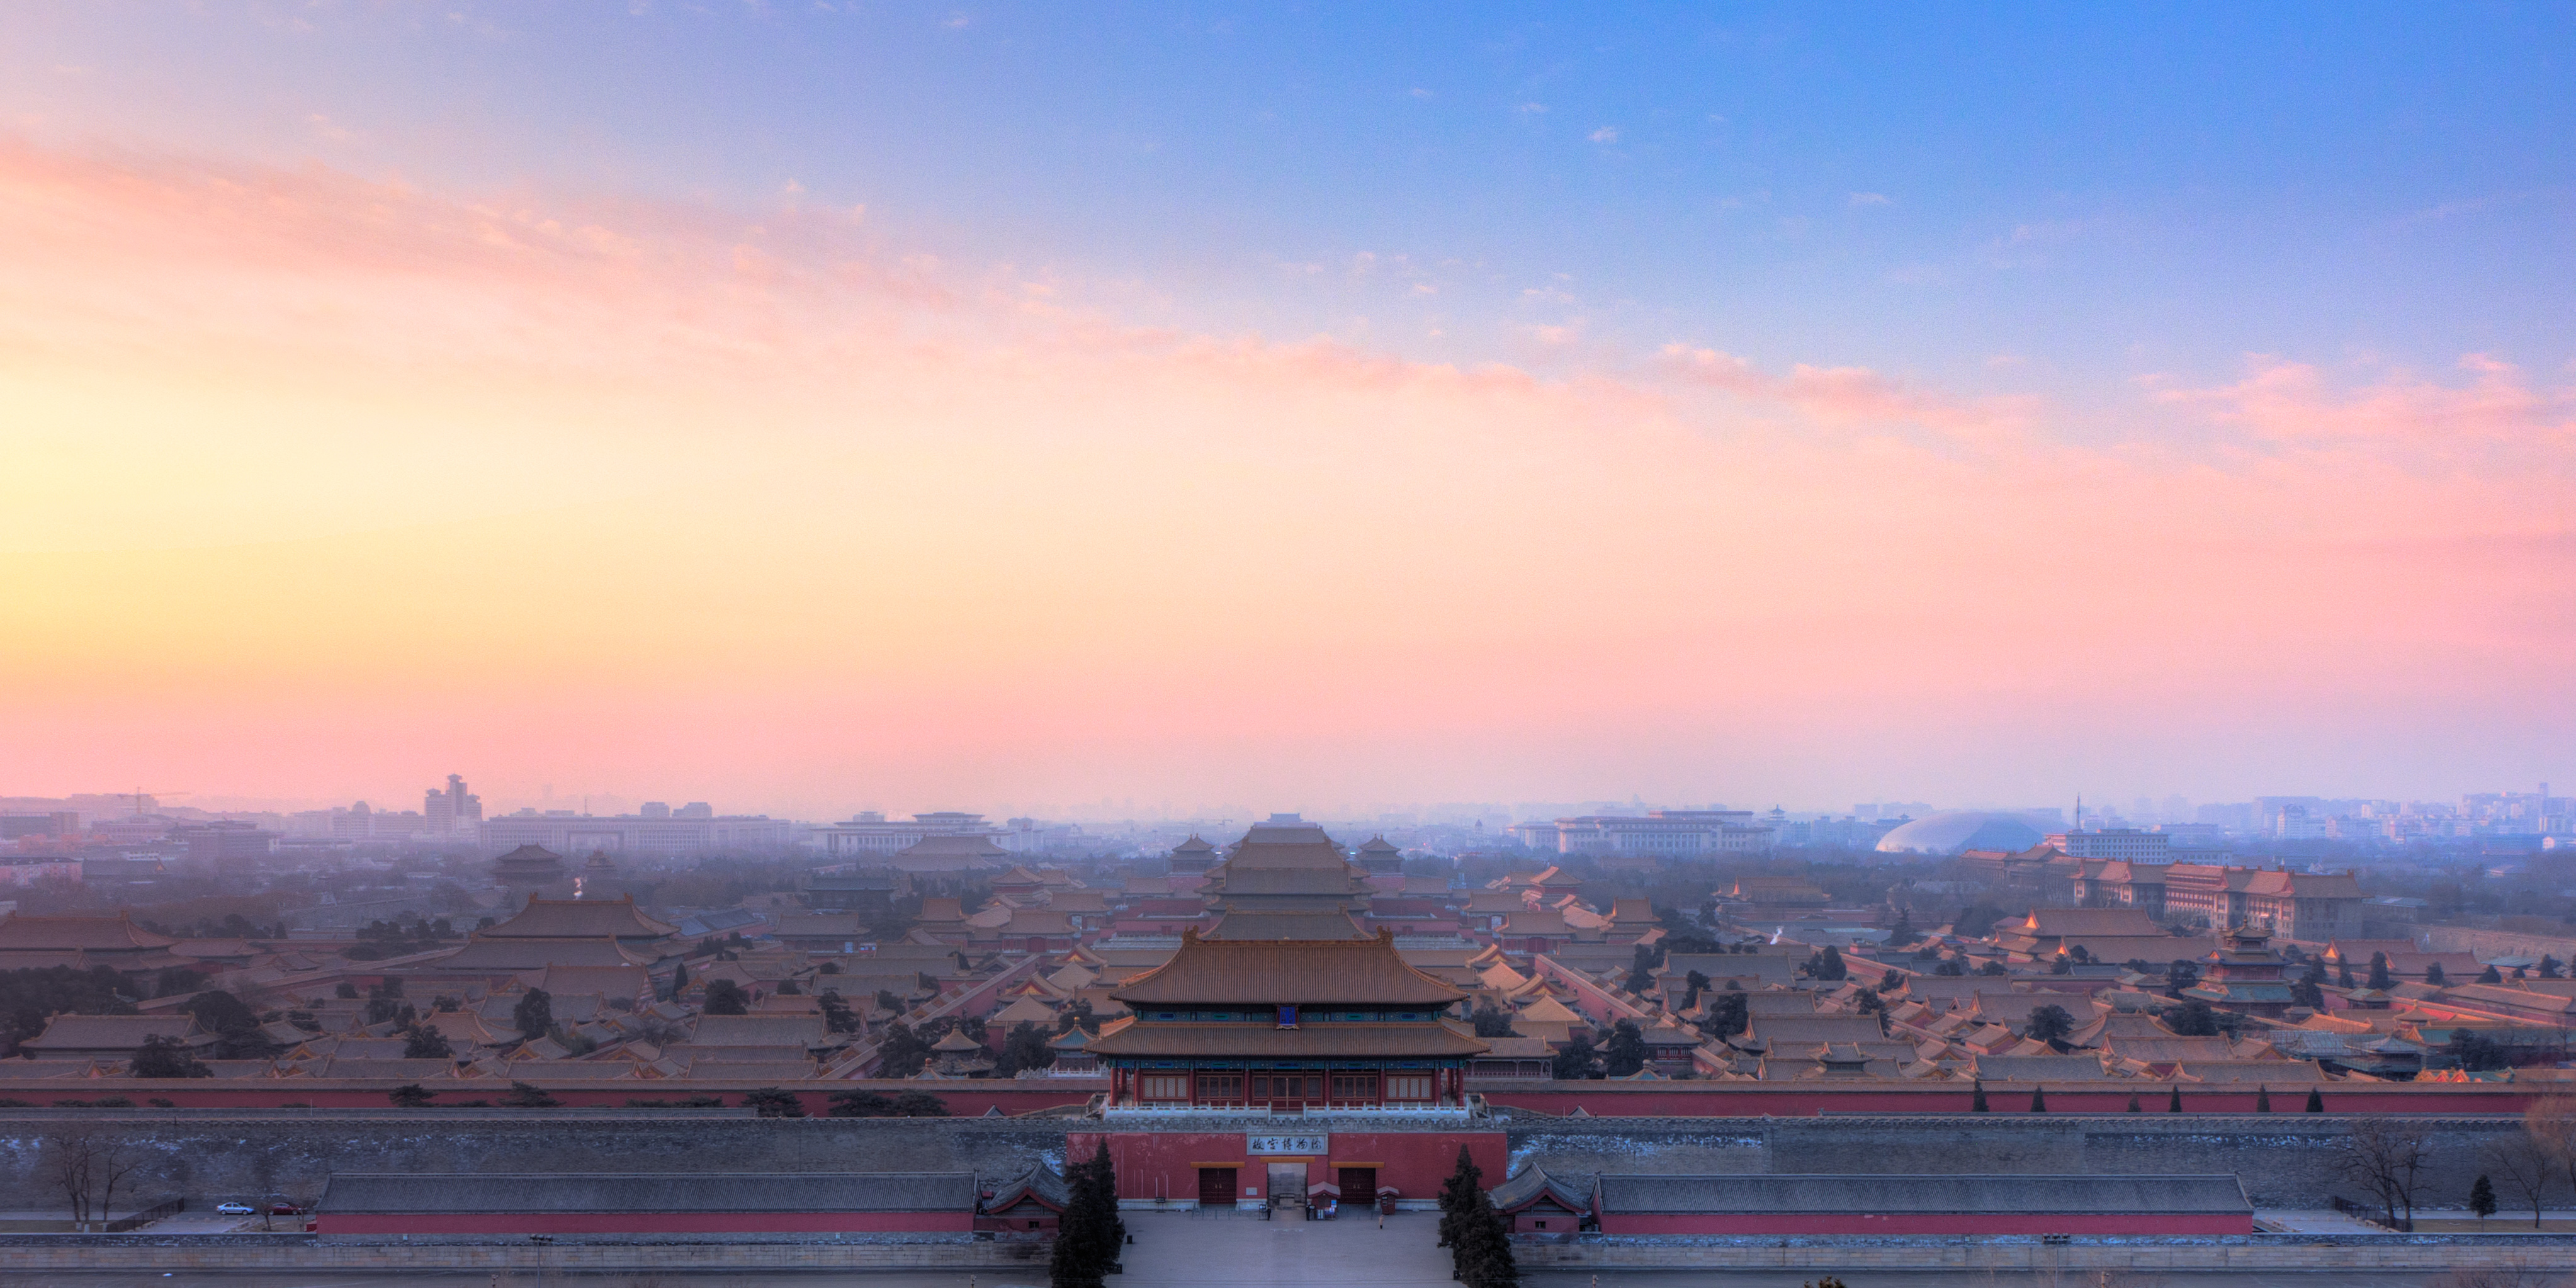 Image of the Forbidden City - tips for planning a trip to Beijing, China, from Wanderful